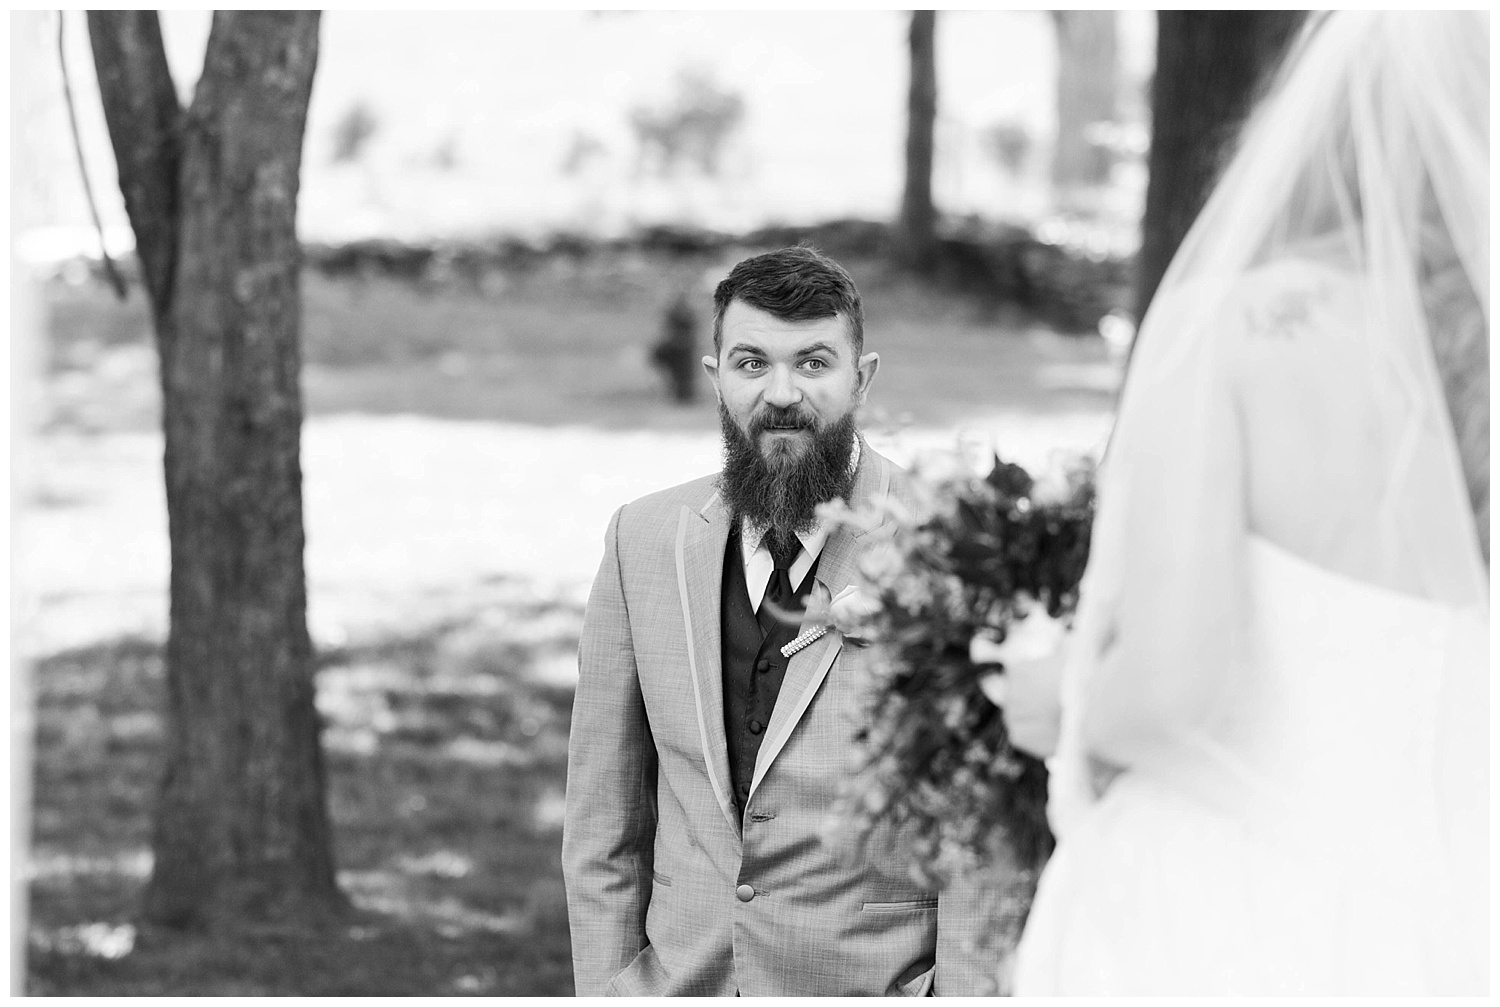  Nothing beats the face of a groom seeing his bride for the first time.  